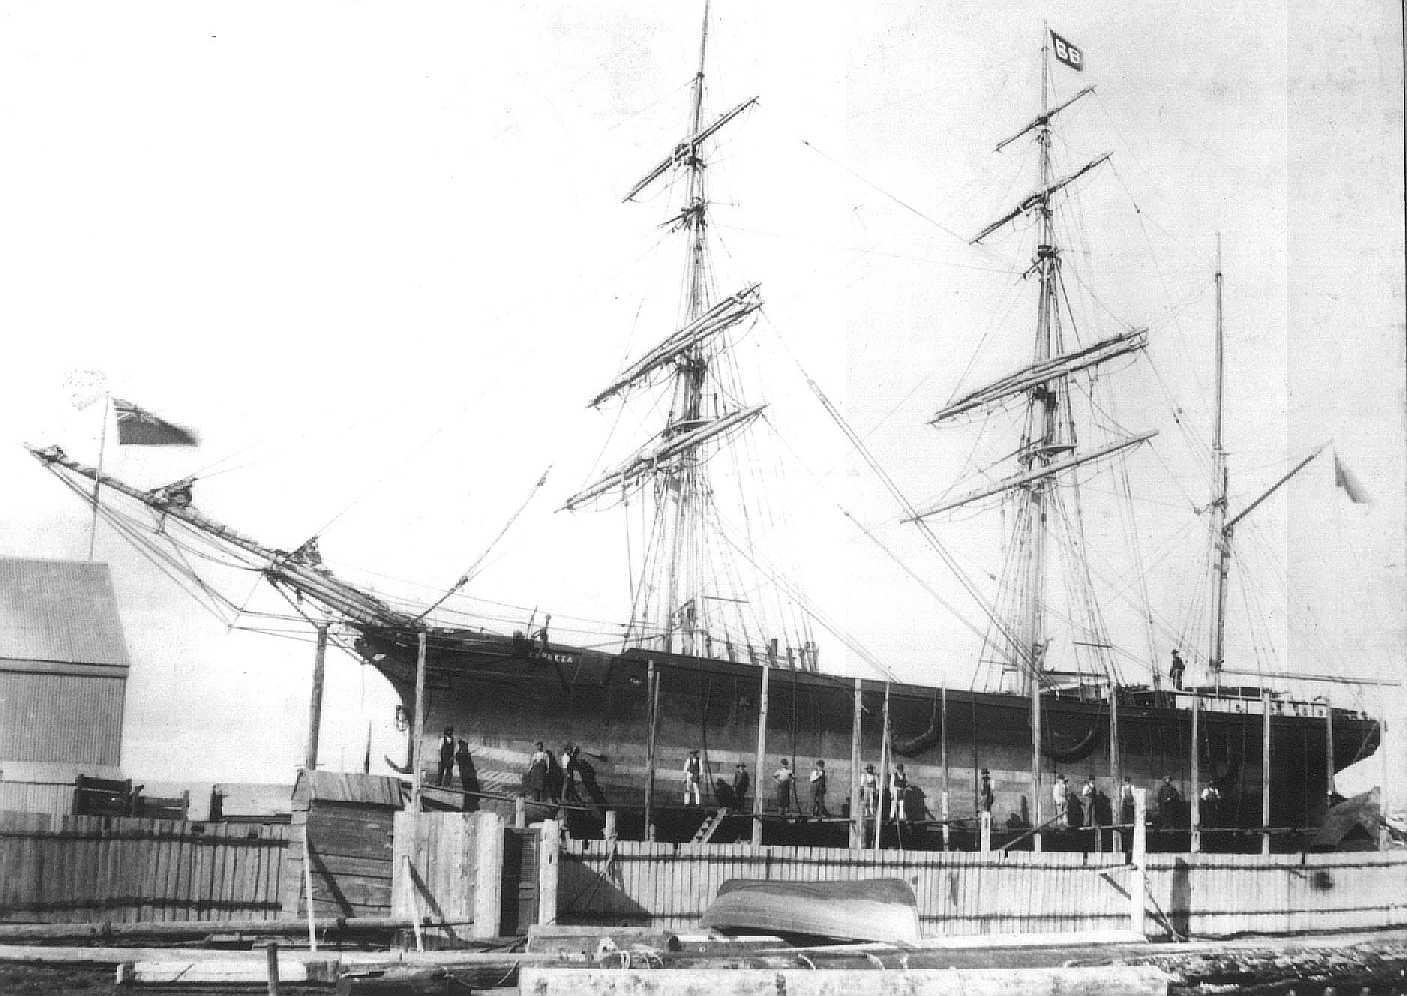 Composite 3 masted Barque built in 1865.
This image shows vessel on Jenkins Slip, Birkenhead, Port Adelaide.